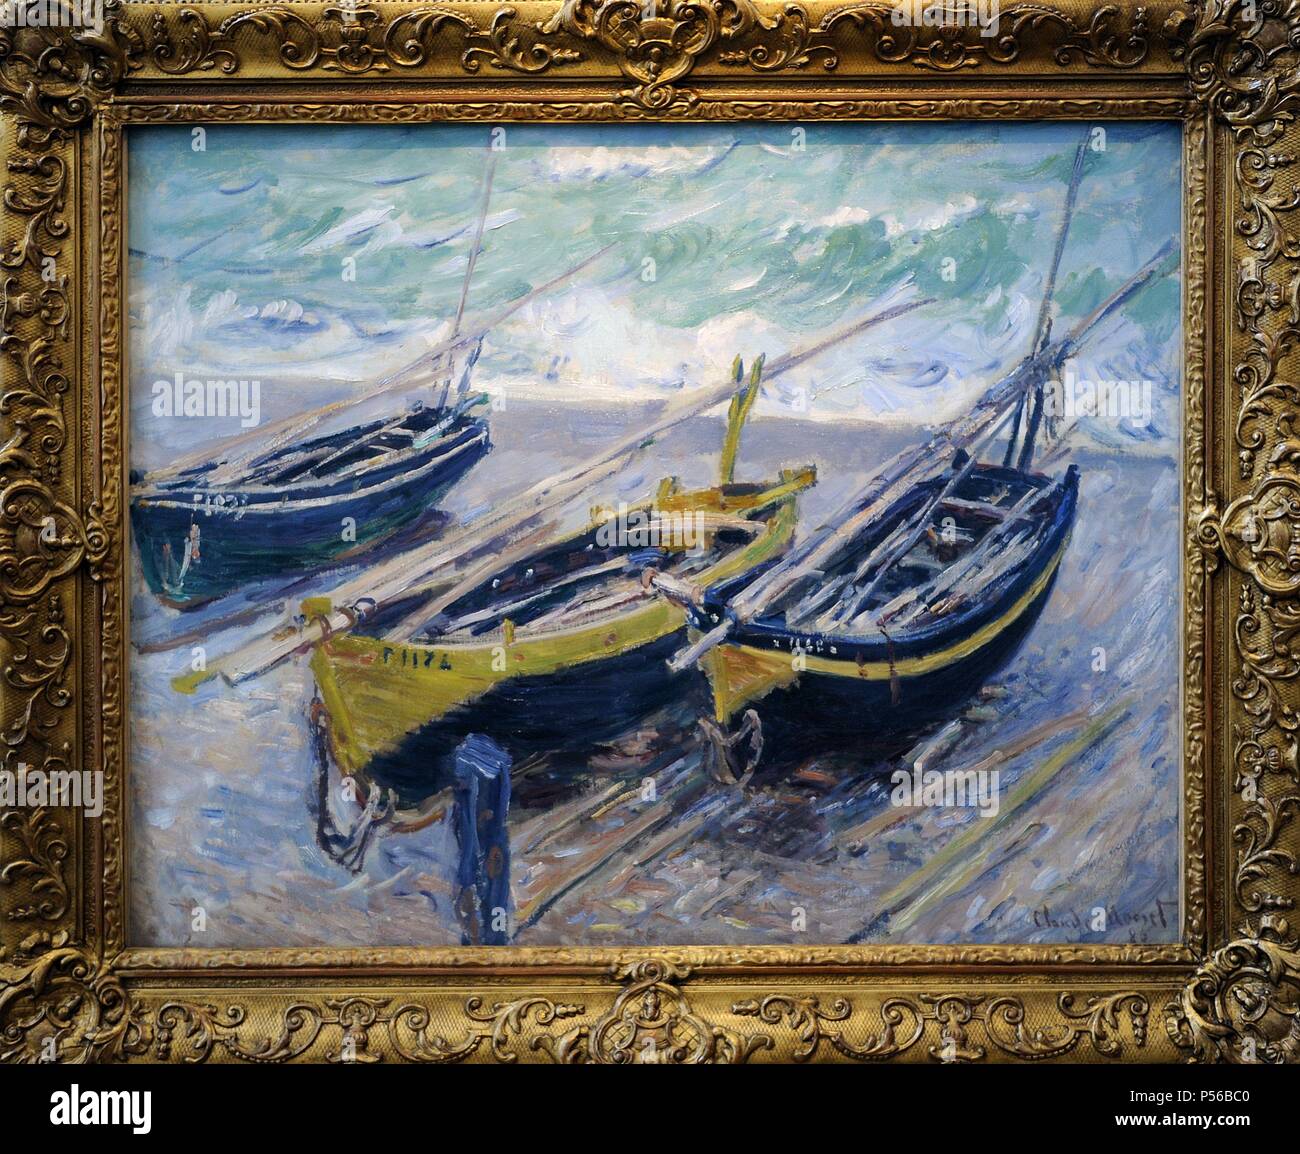 Claude Monet (1840-1926). French painter founder of French impressionist painting. Three Fishing Boats, 1886. Oil on canvas. Museum of Fine Arts. Budapest. Hungary. Stock Photo